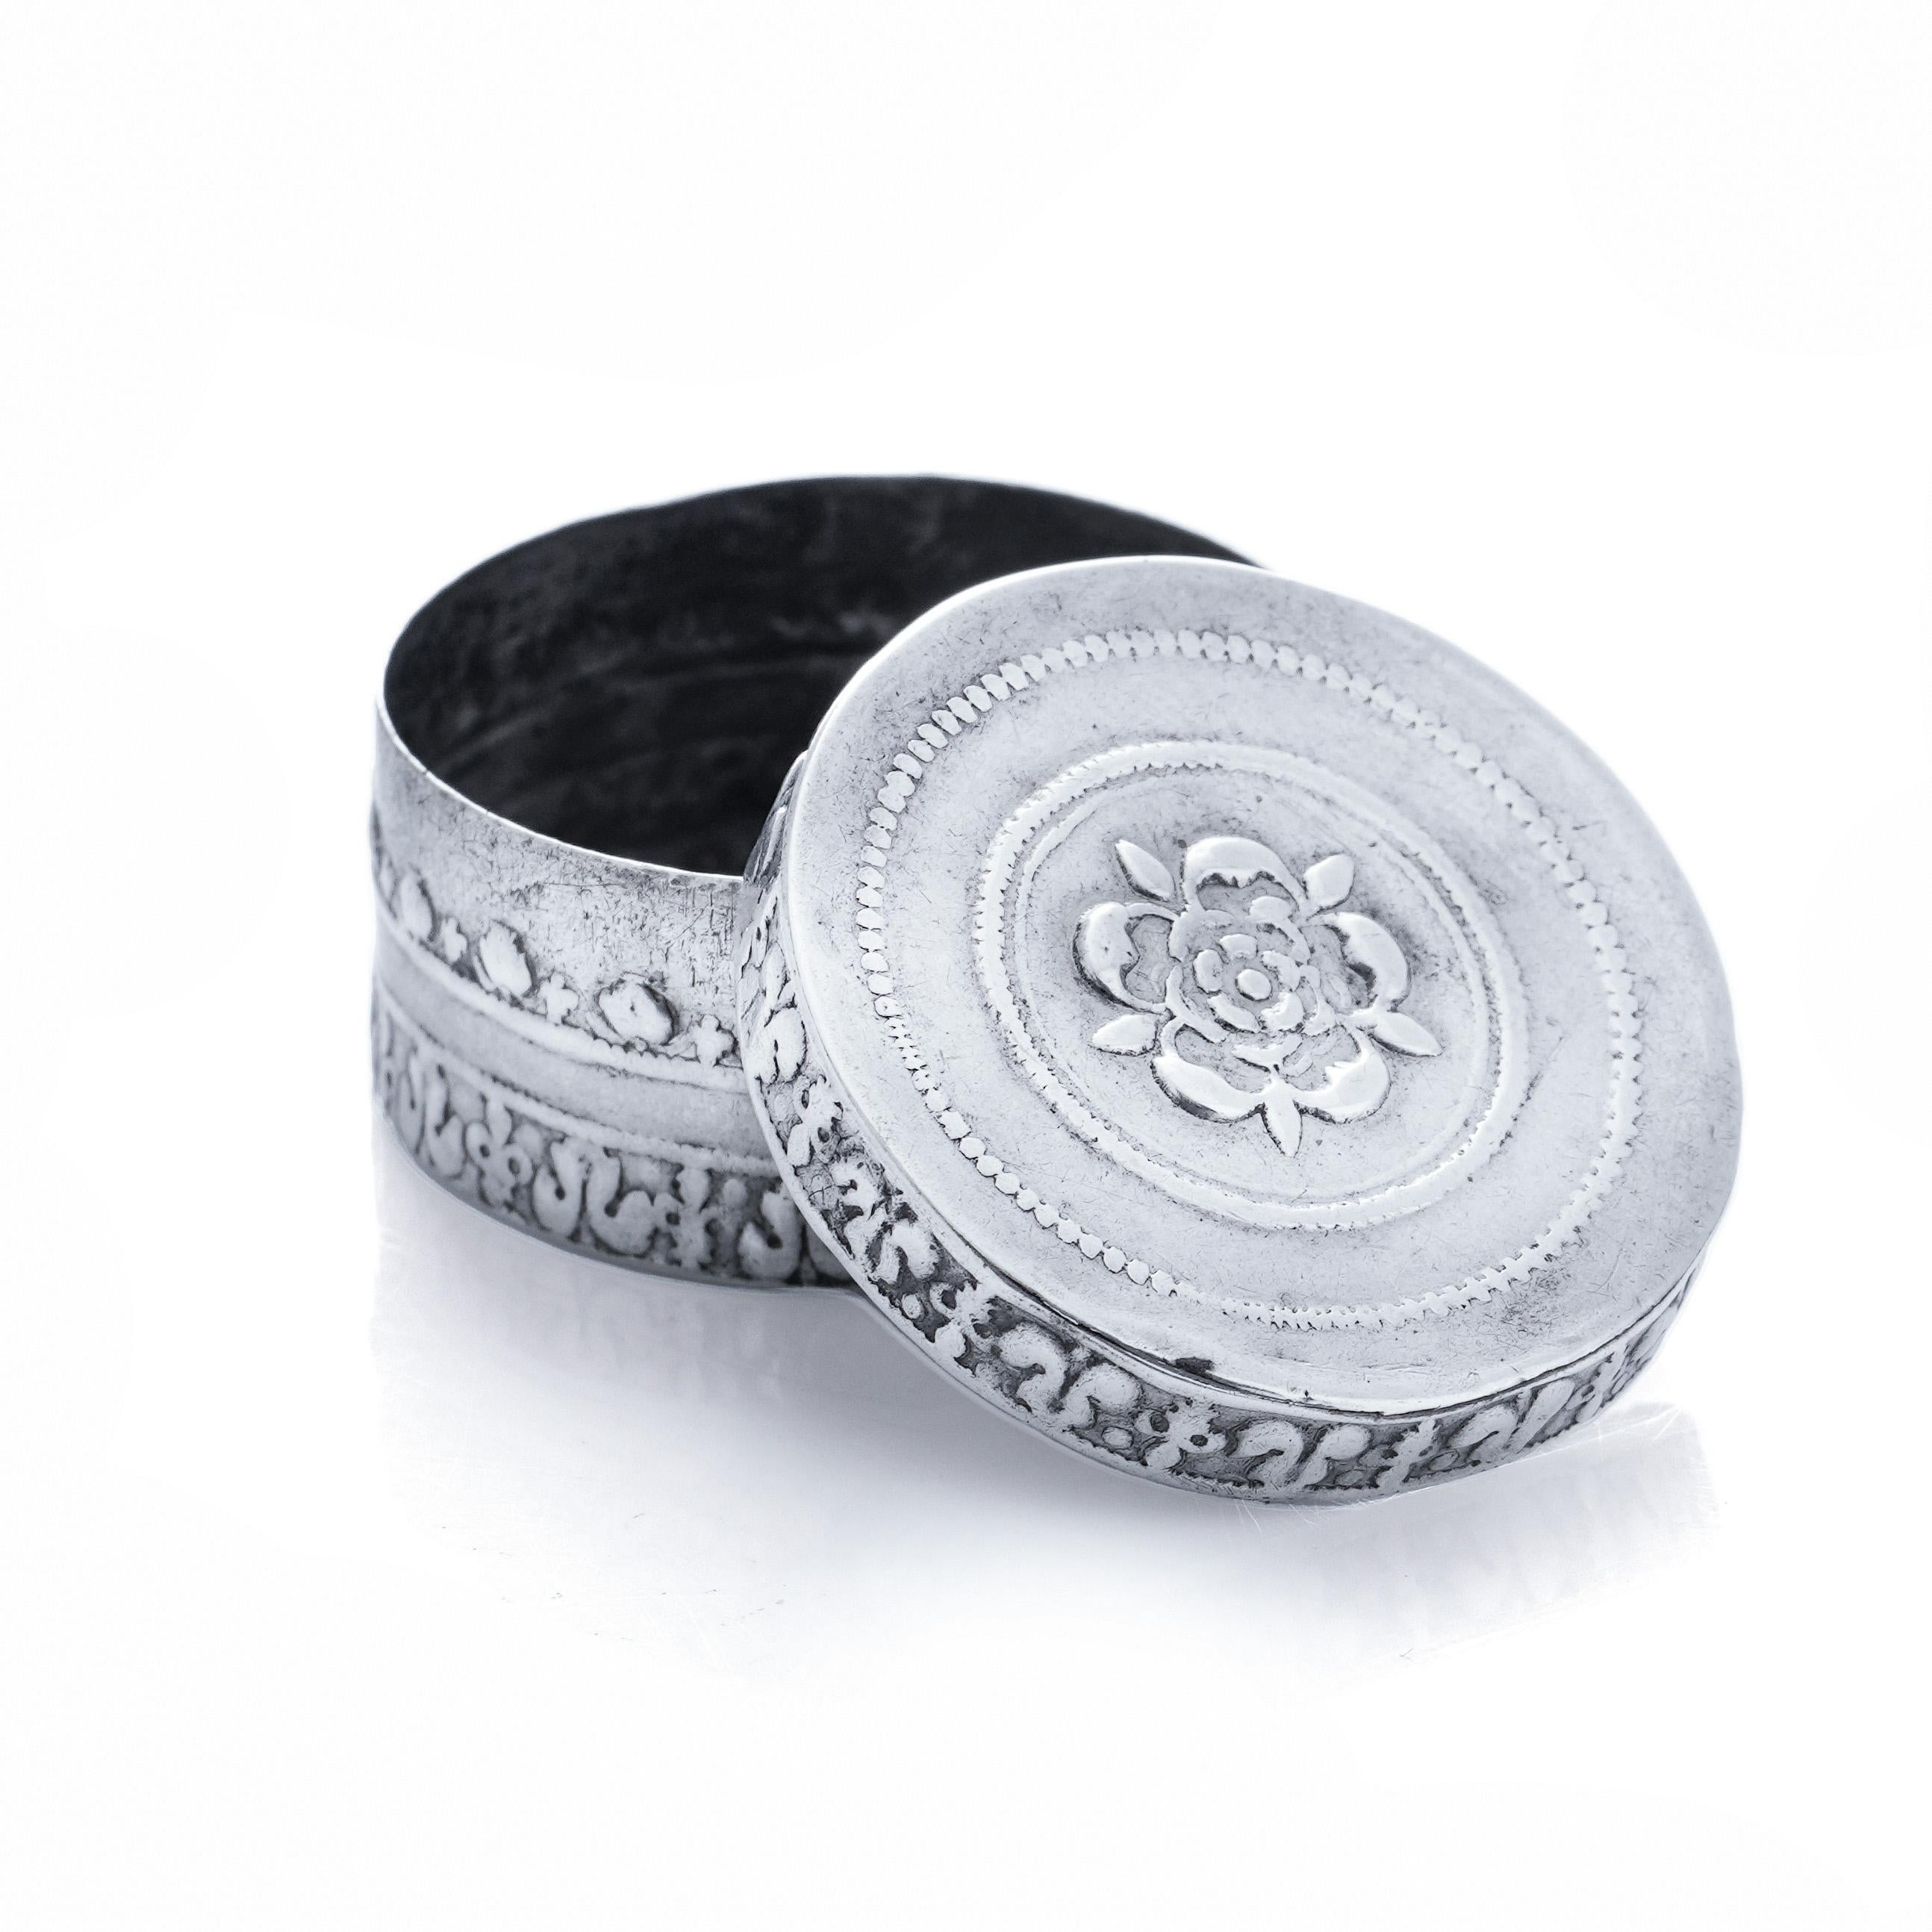 An antique round patch box, crafted in sterling silver during the 17th century, is potentially from the era of Charles II. The silver circular box and cover showcase embossing featuring a Tudor Rose within a bordered design. The interior is